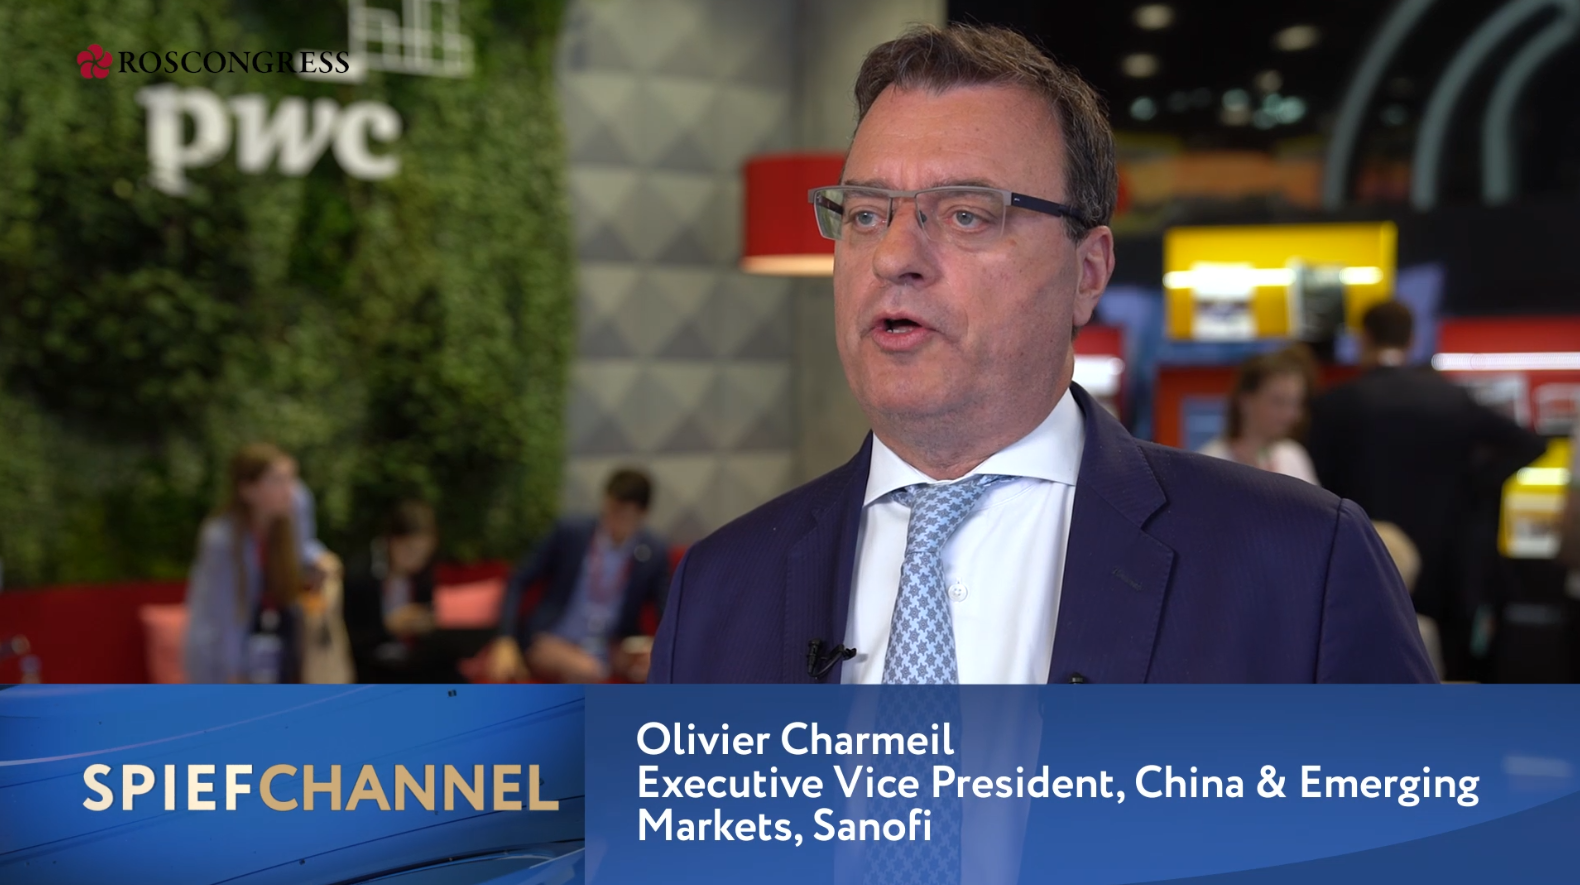 Olivier Charmeil, Executive Vice President, China and Emerging Markets , Sanofi